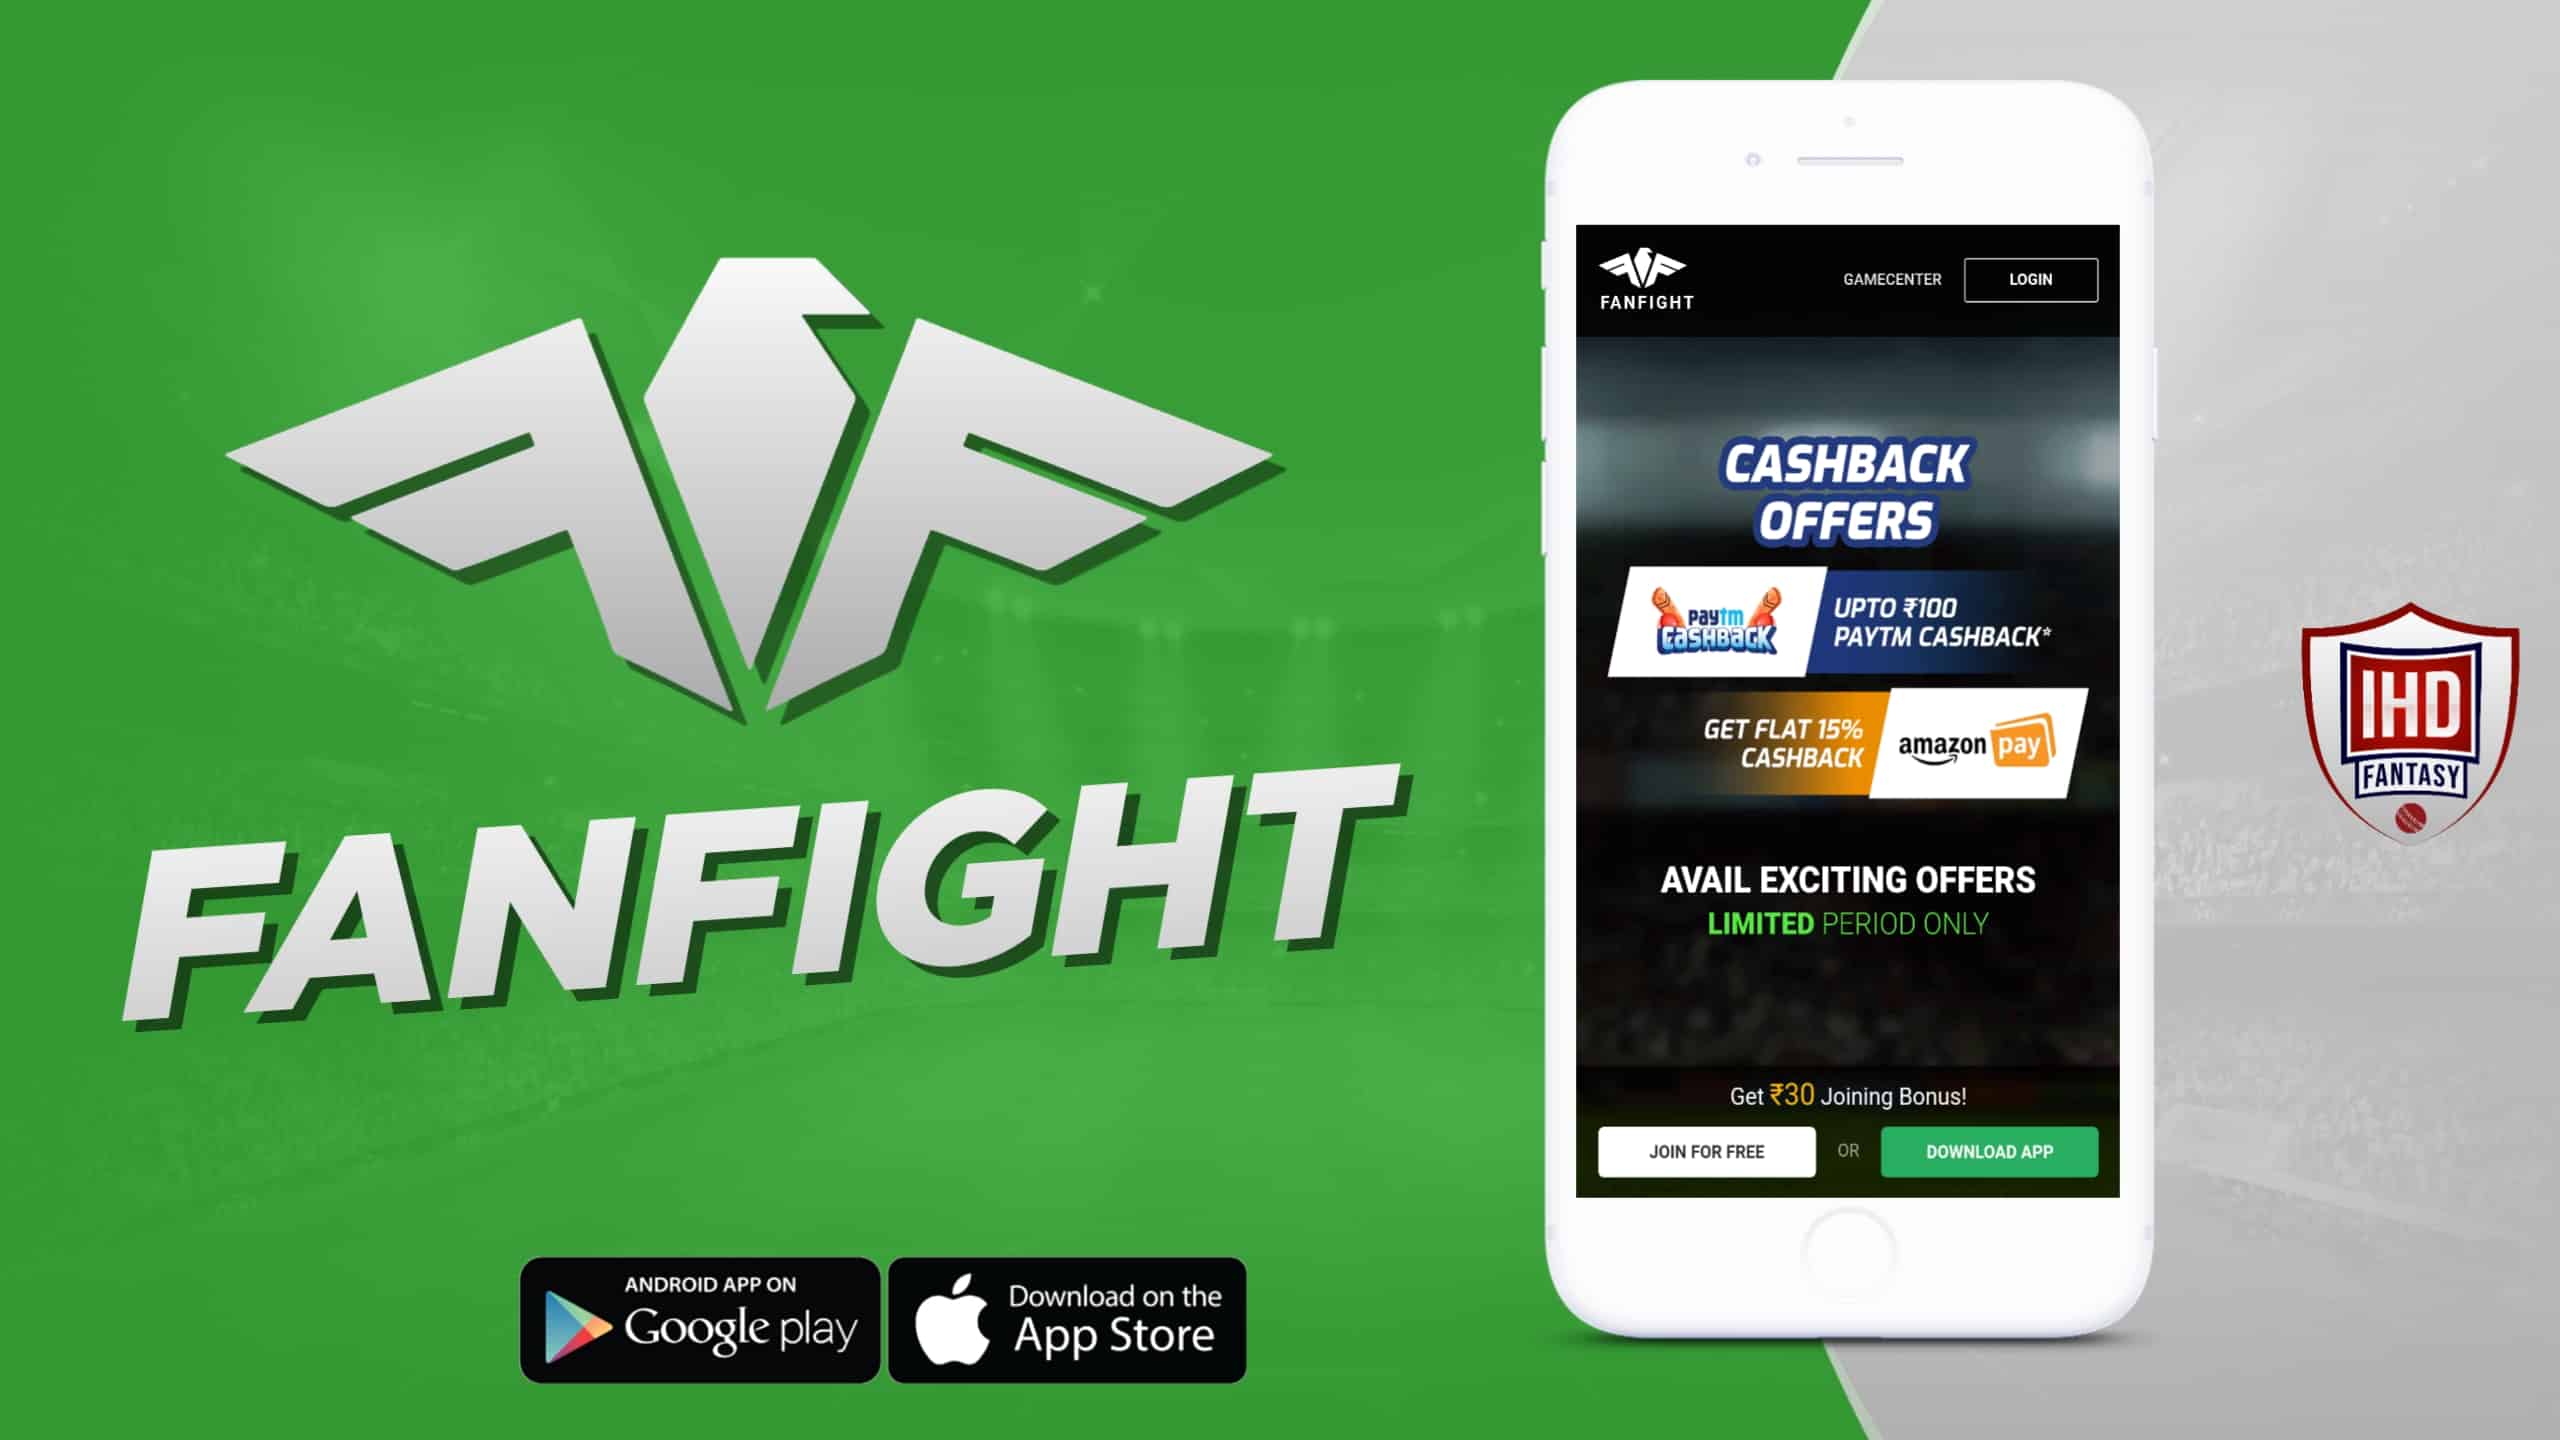 FanFight, with new engaging features, becomes one of India’s top fantasy sports platforms